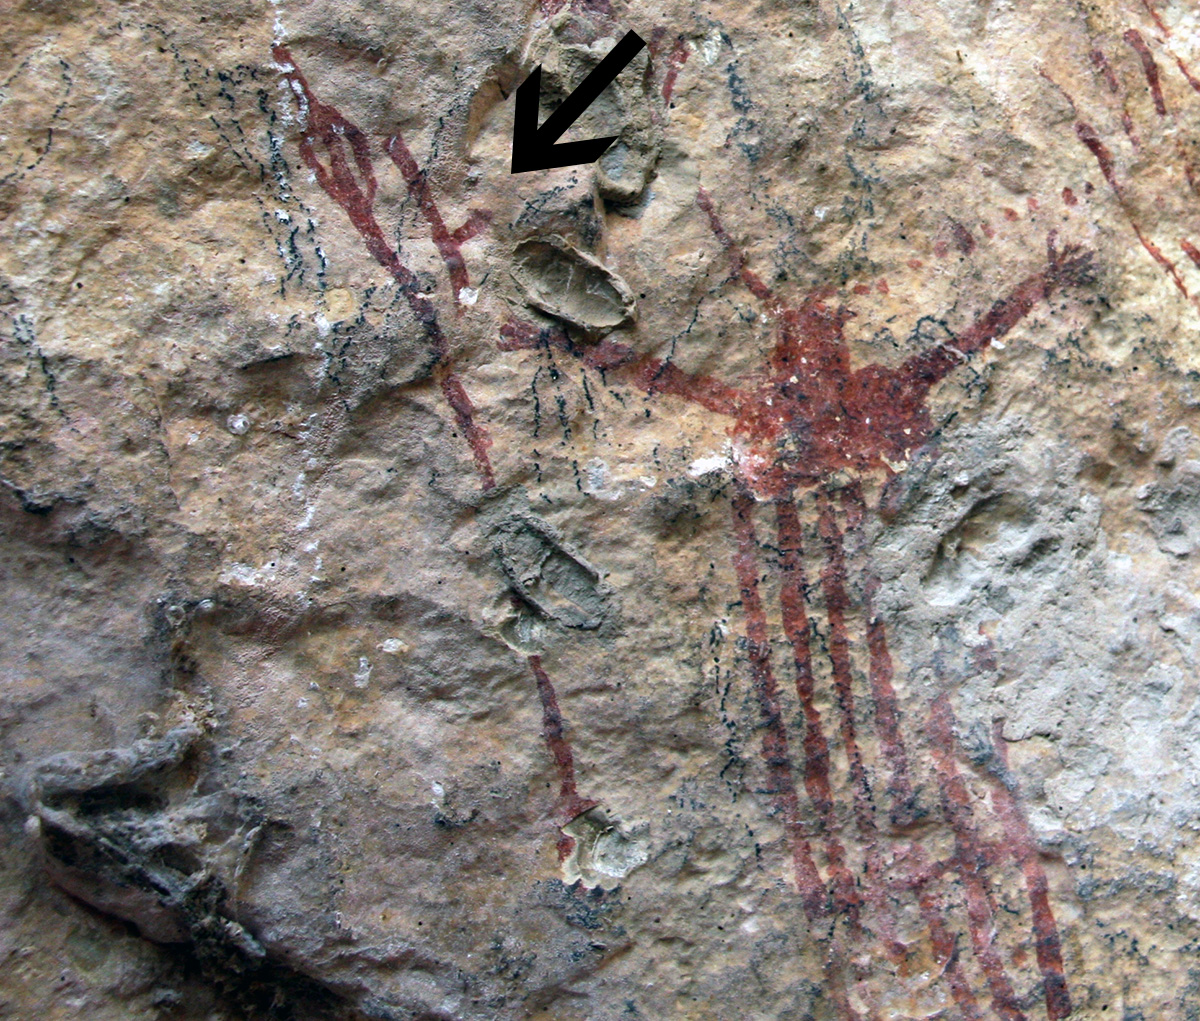 Pecos River Style anthropomorph from Parida Cave wielding a weighted atlatl.